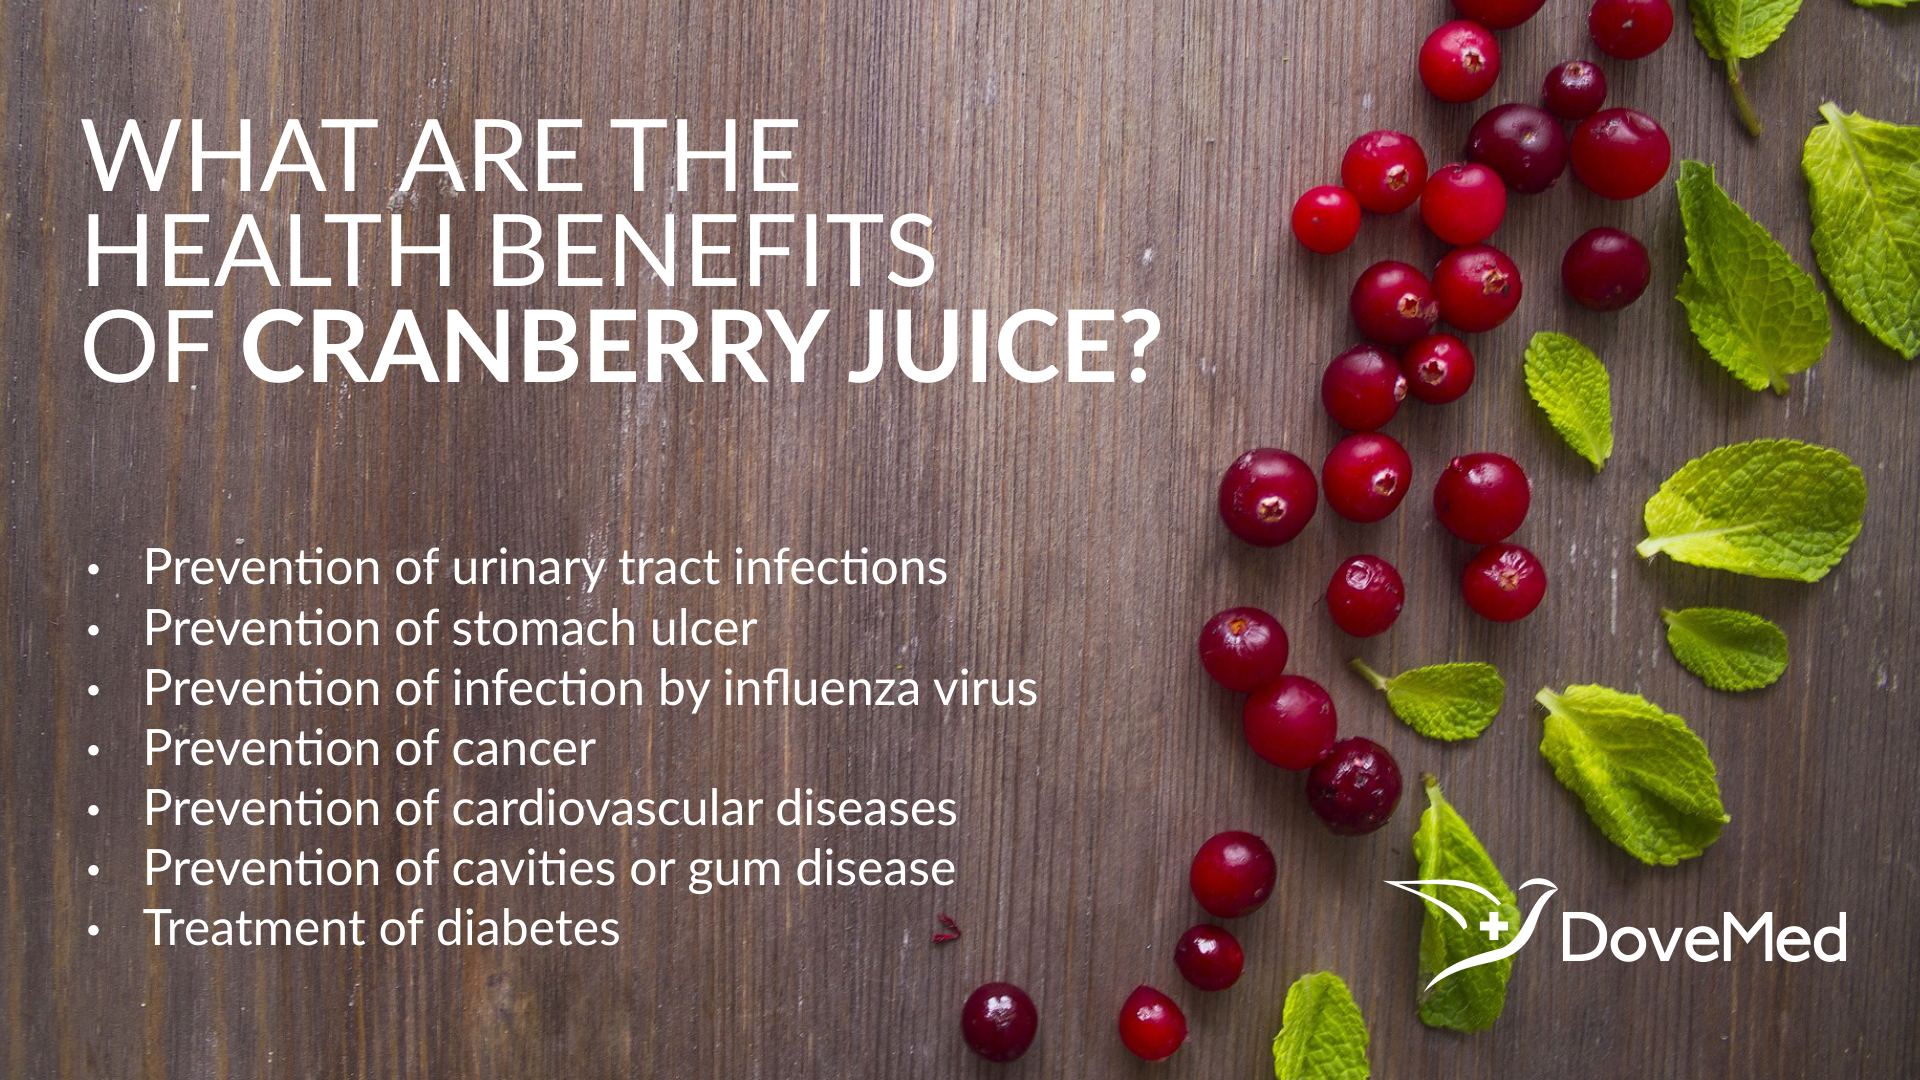 what are the health benefits of cranberry juice?